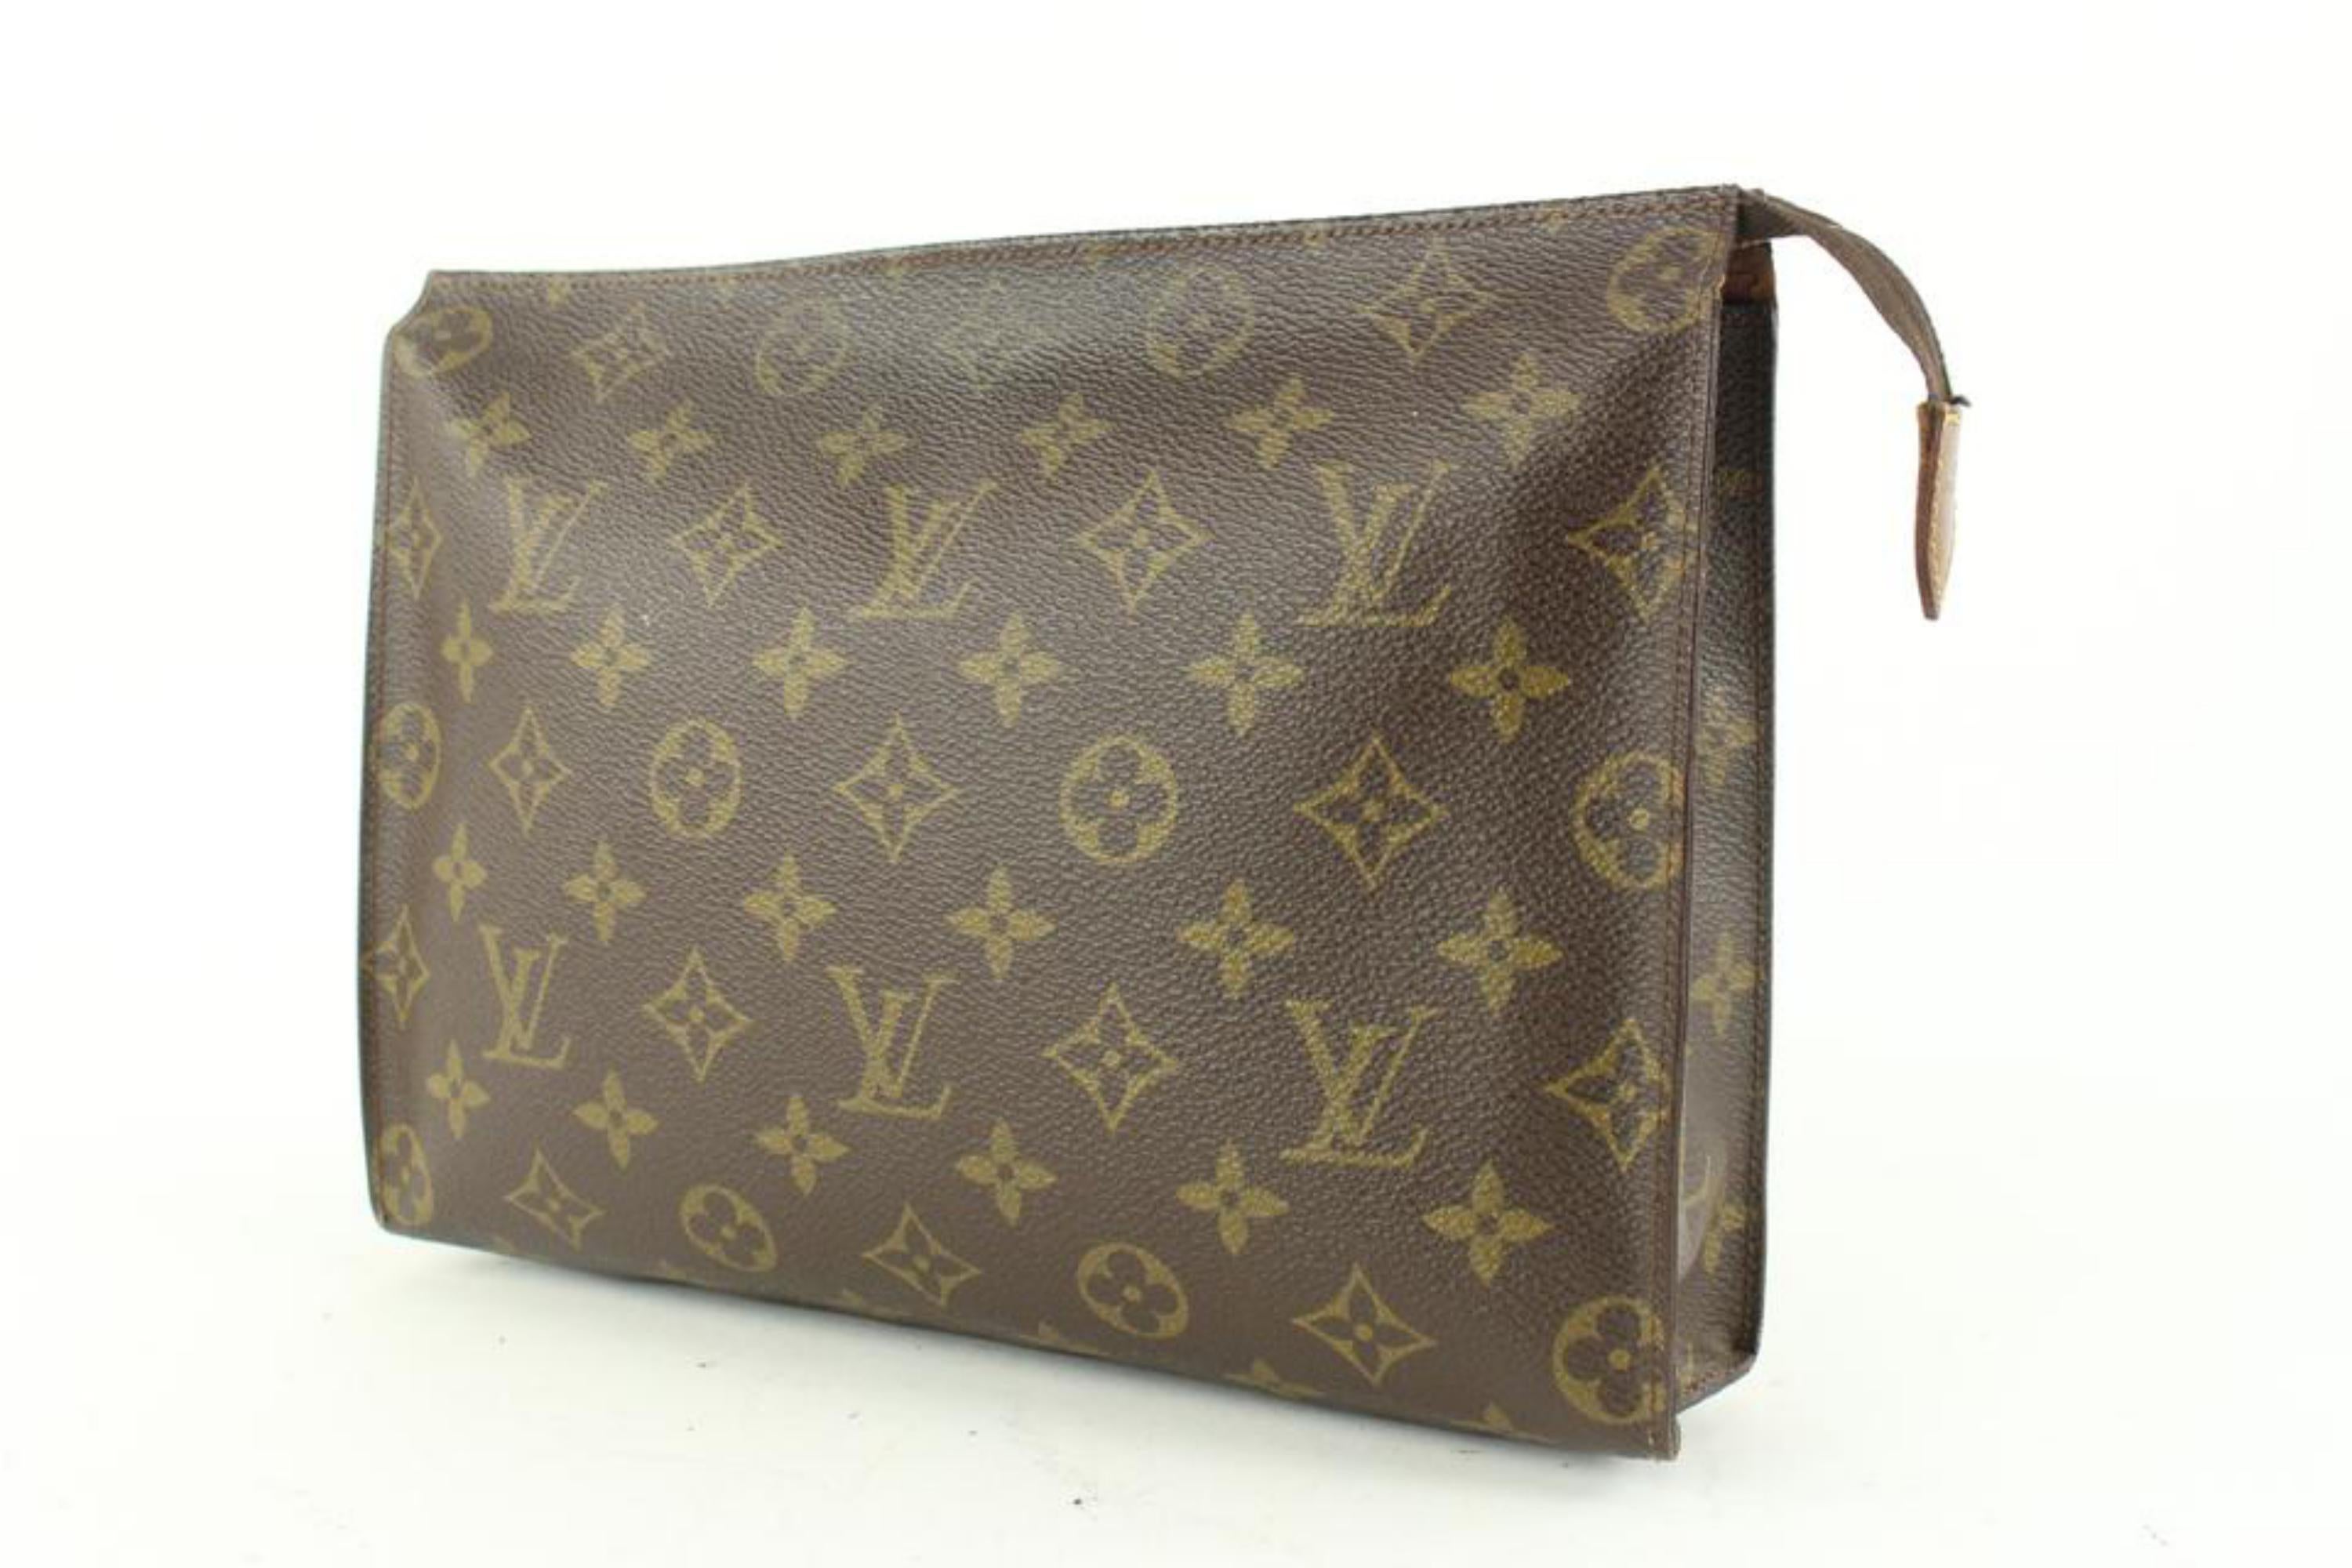 Louis Vuitton Discontinued Monogram Toiletry Pouch 26 Poche Toilette 111lv16
Date Code/Serial Number: AN0911
Made In: France
Measurements: Length:  10